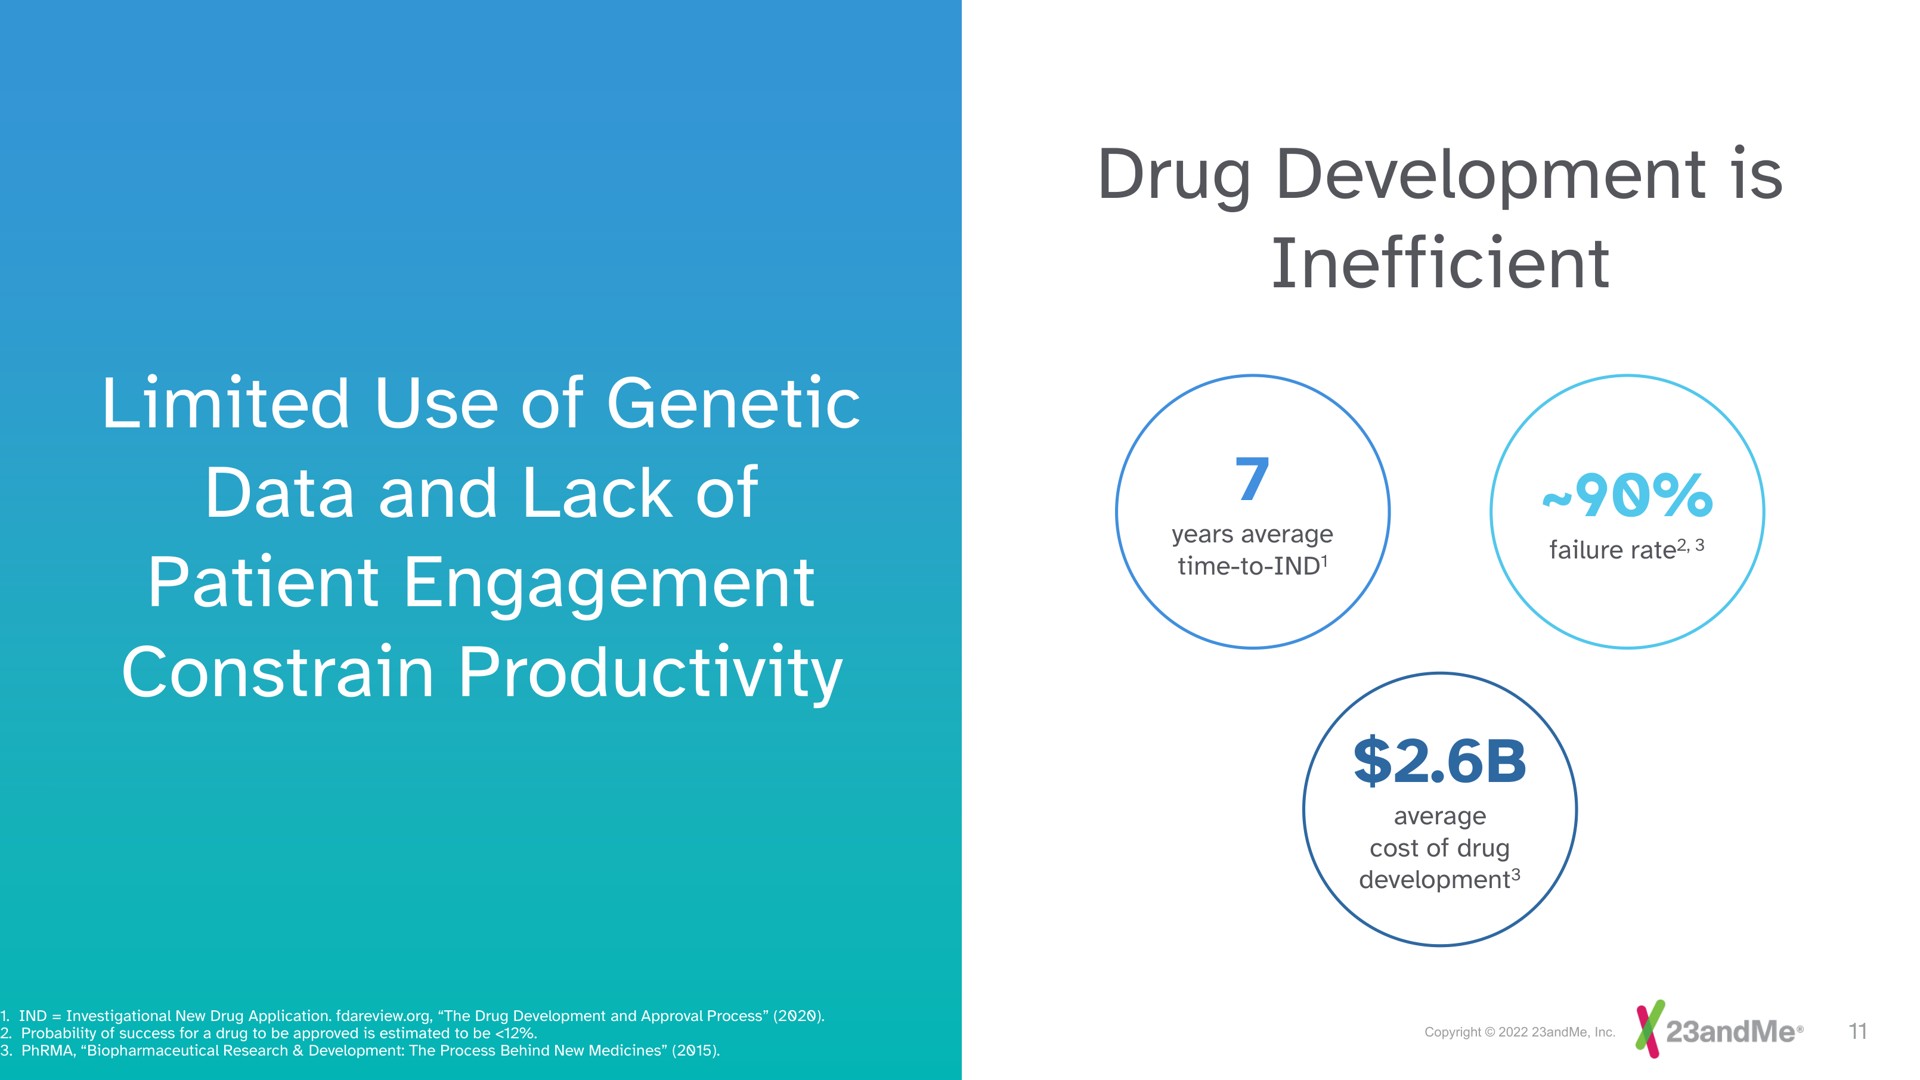 limited use of genetic data and lack of patient engagement constrain productivity drug development is inefficient | 23andMe